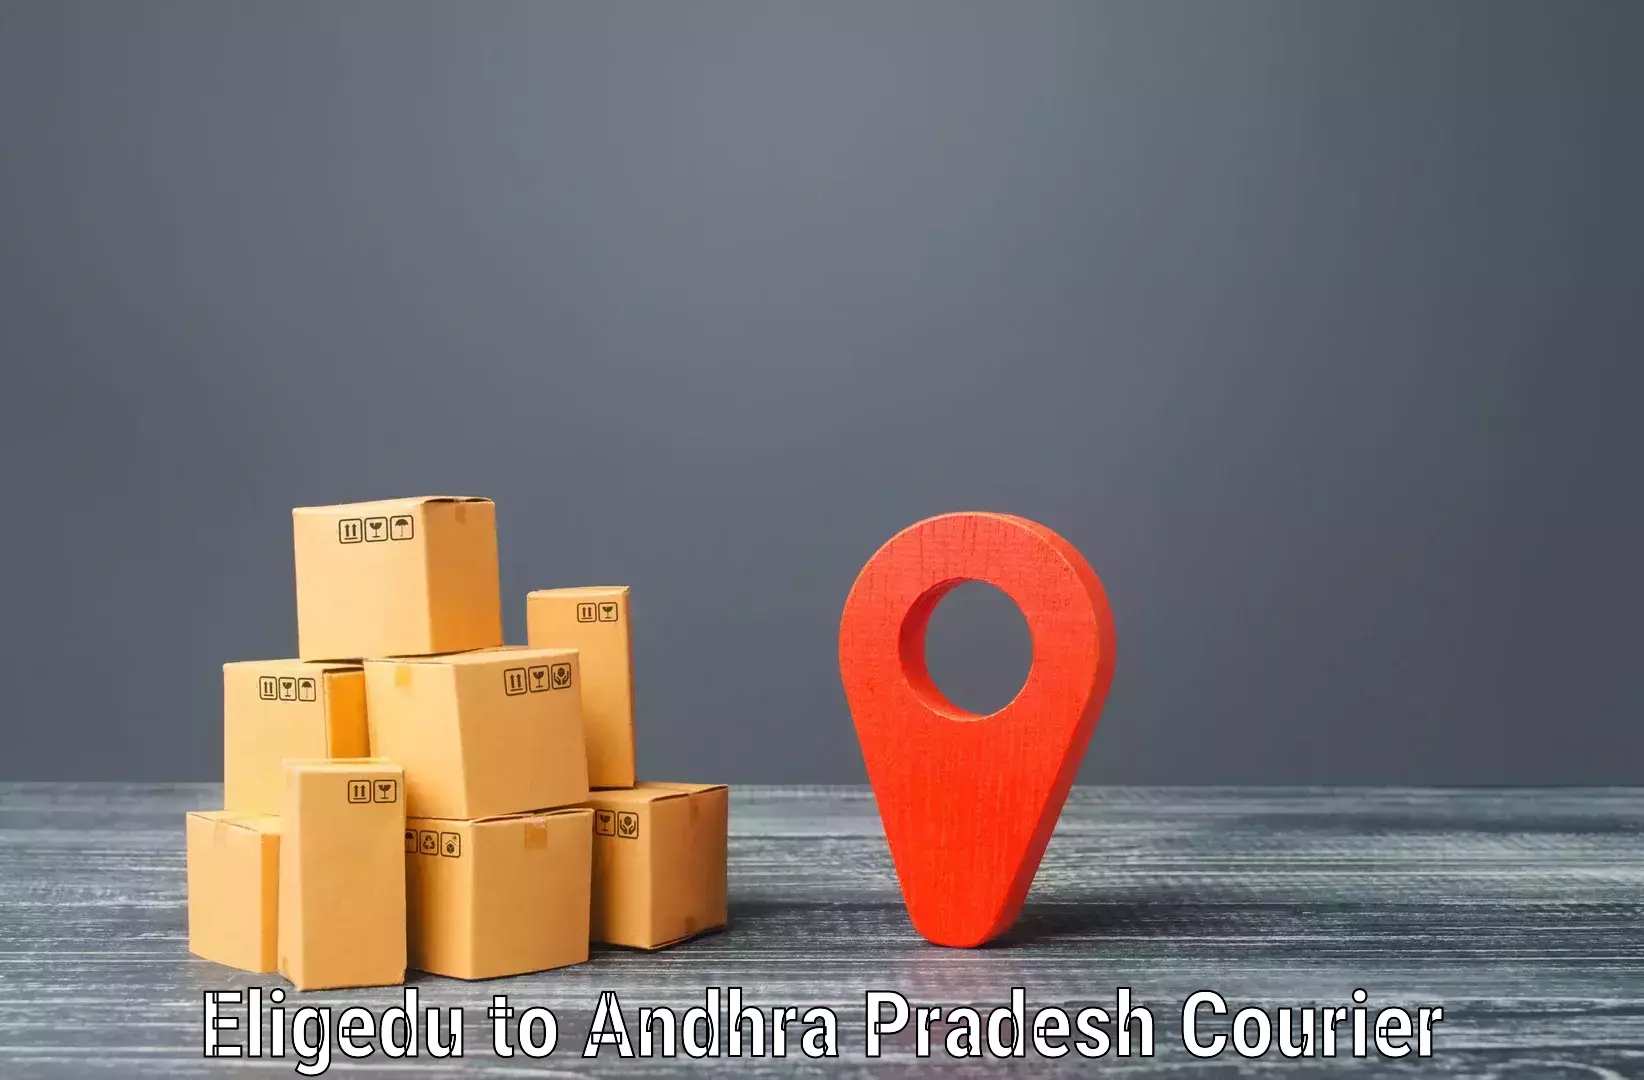 High-capacity courier solutions Eligedu to Mangalagiri